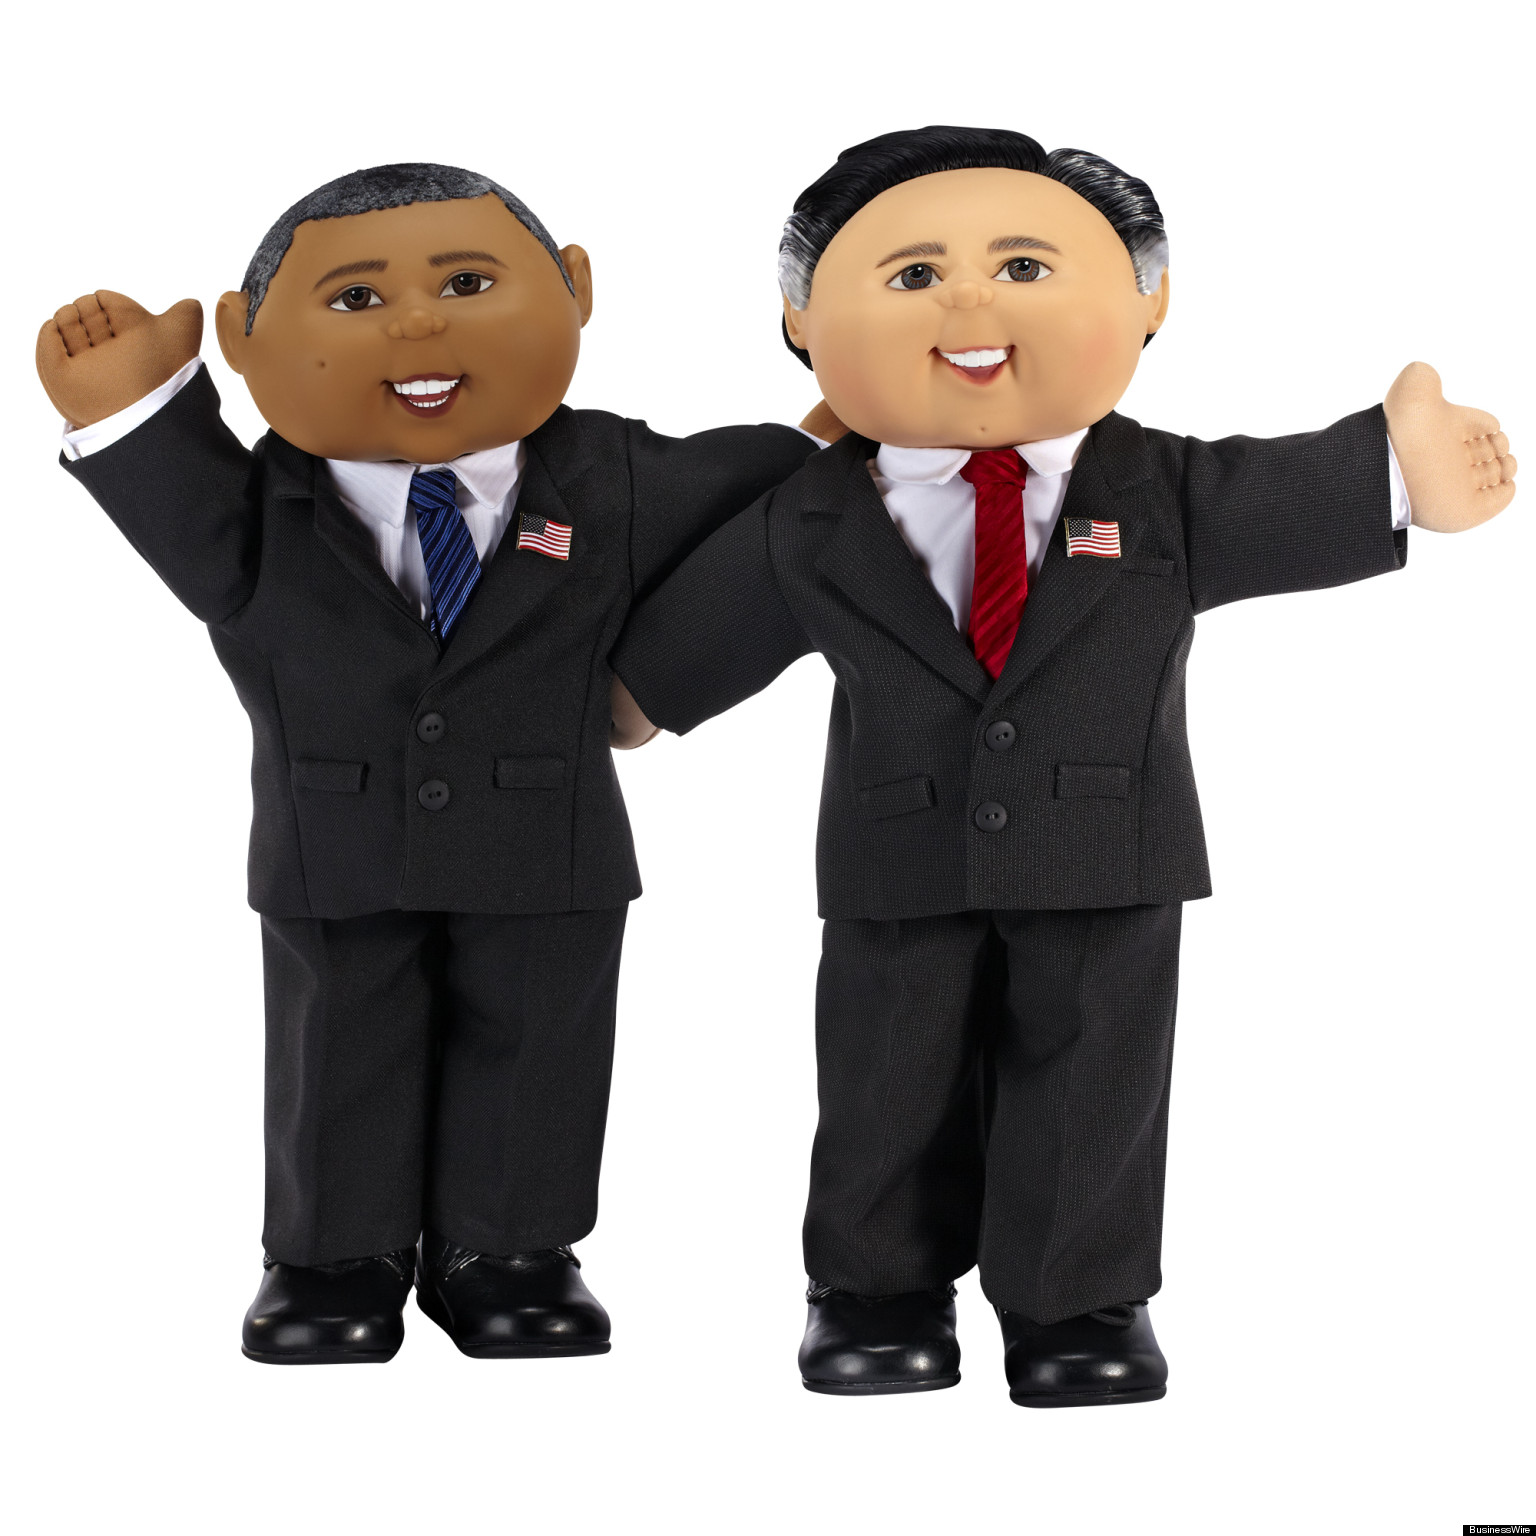 Barack obama and michelle obama as cabbage patch dolls | crazy.